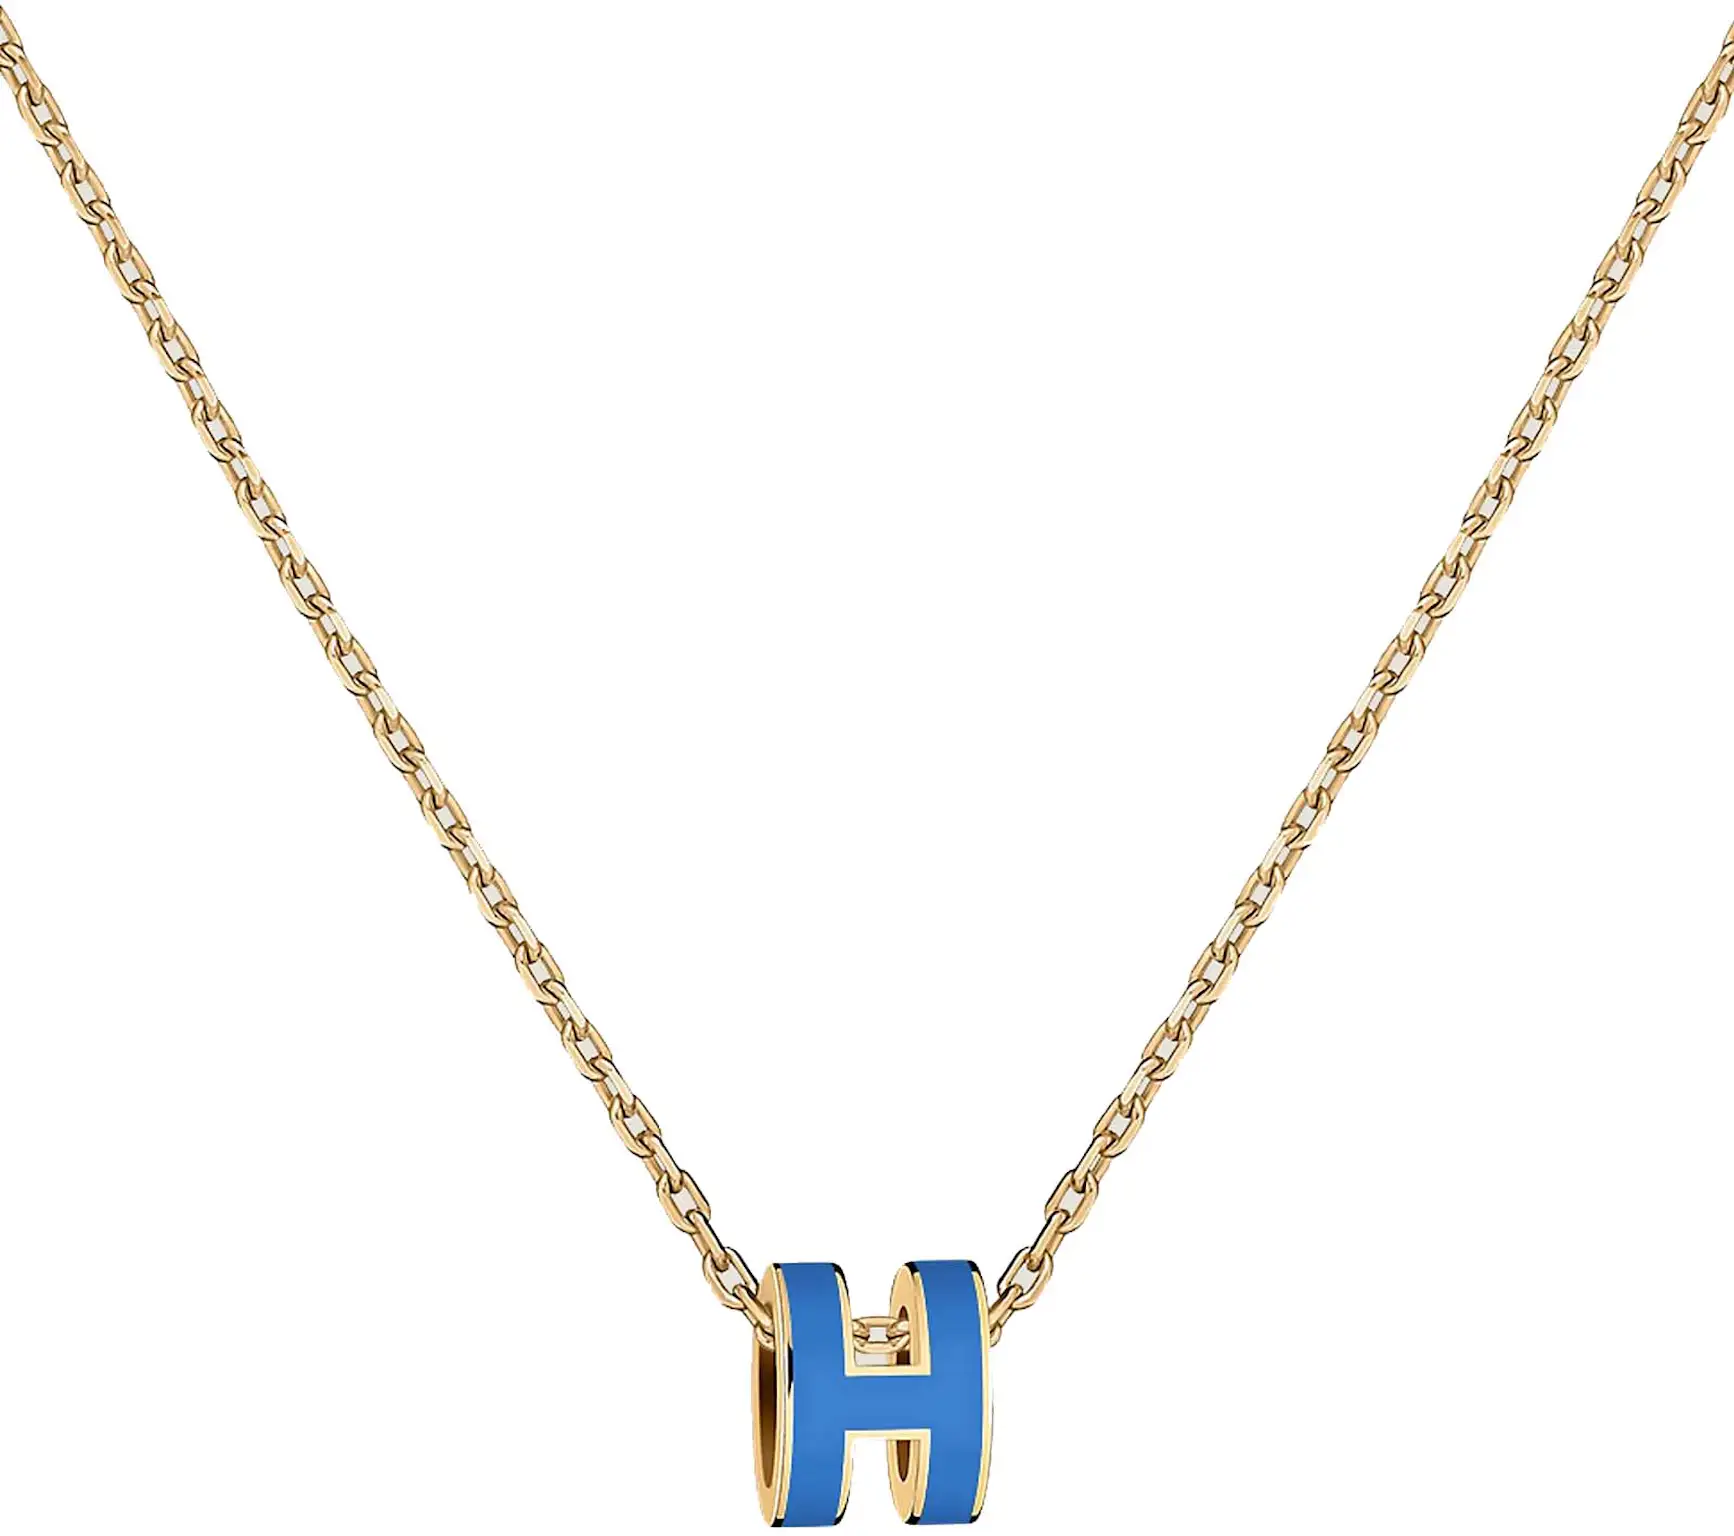 Hermes Mini Pop H Pendant Bleu Sature in Lacquered Metal with Gold-tone